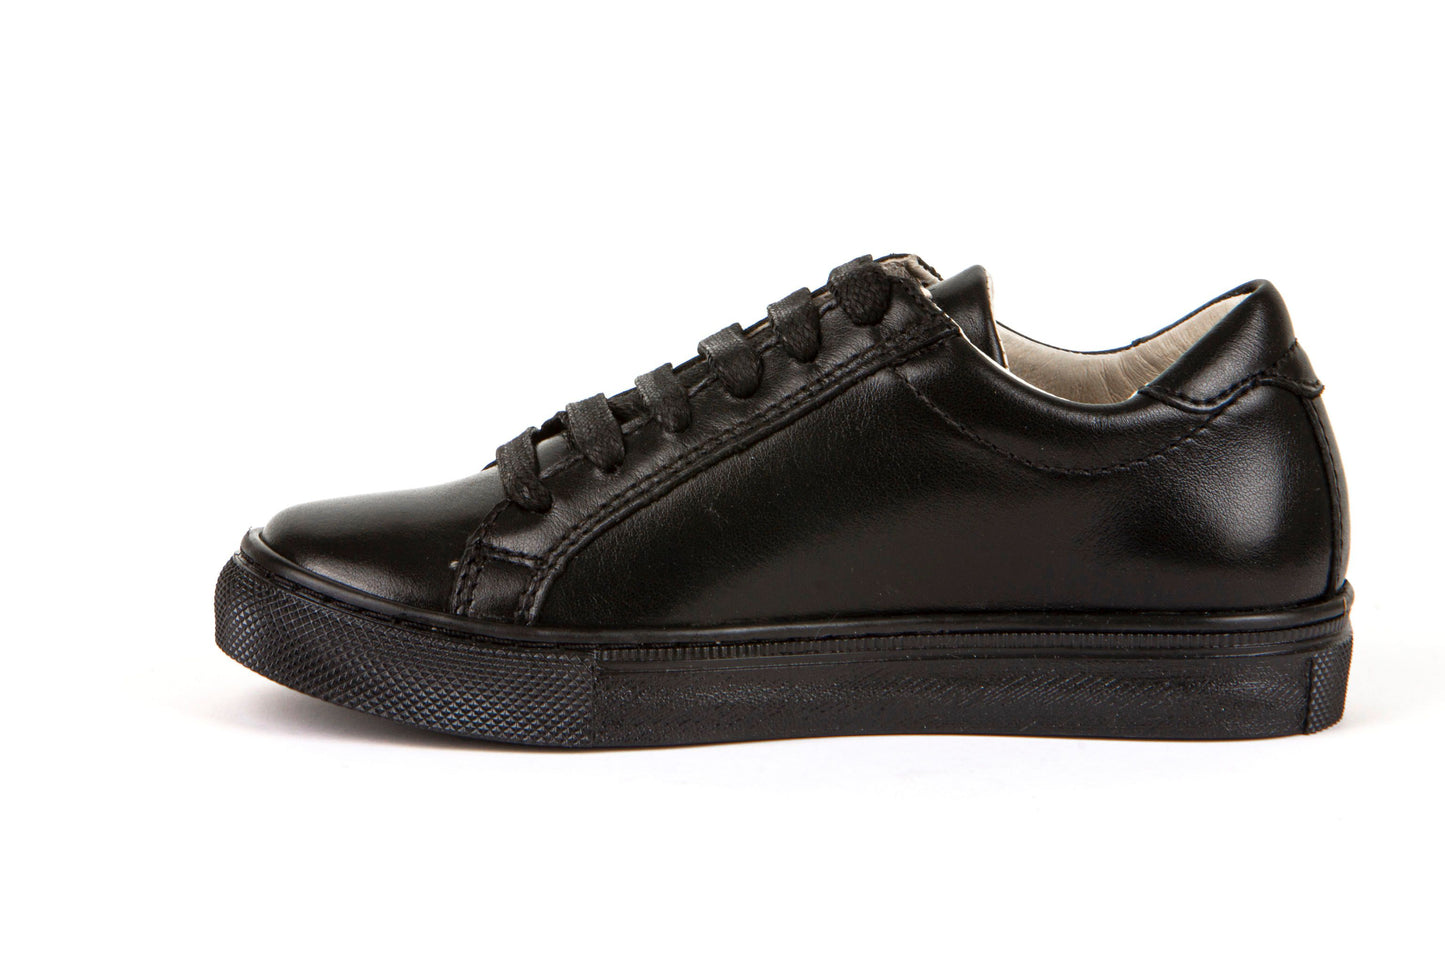 Froddo Black leather Lace up School Shoes